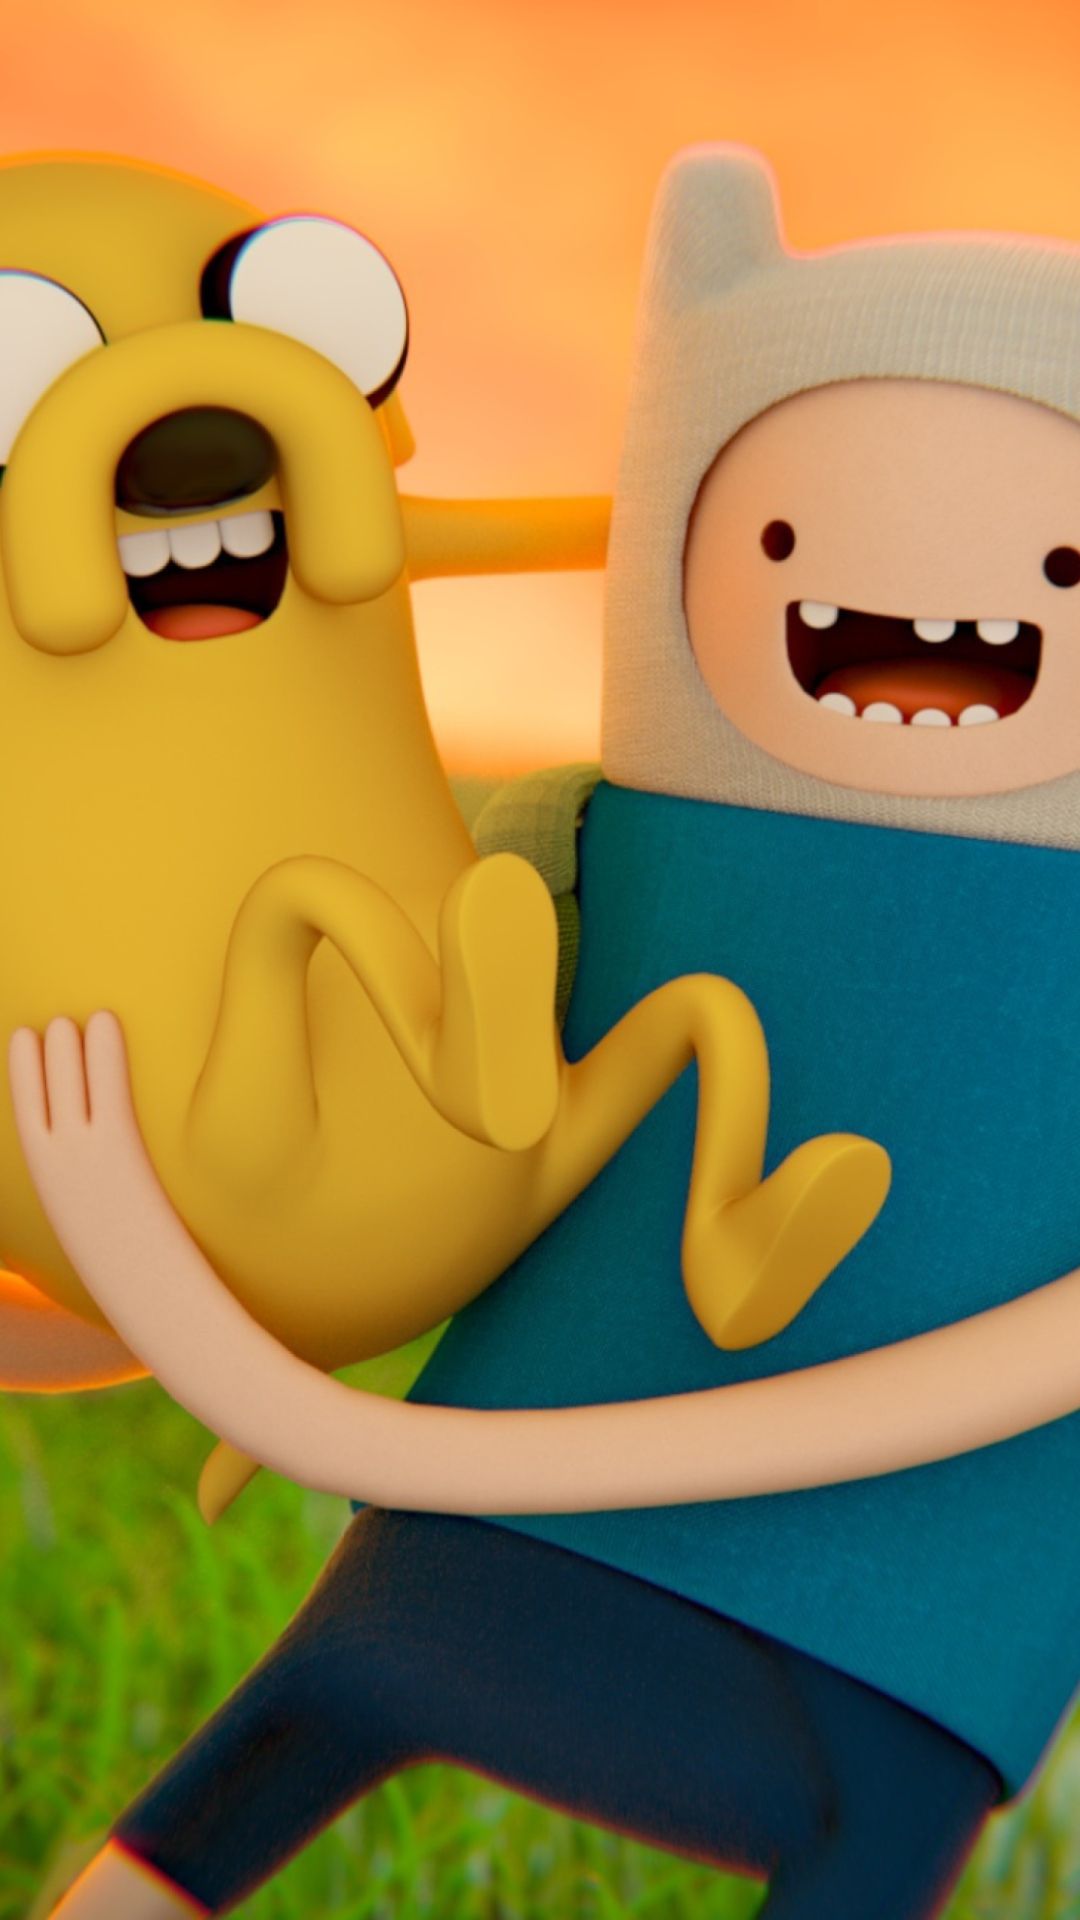 Finn And Jake Adventure Time Wallpaper Android Download Kecbio